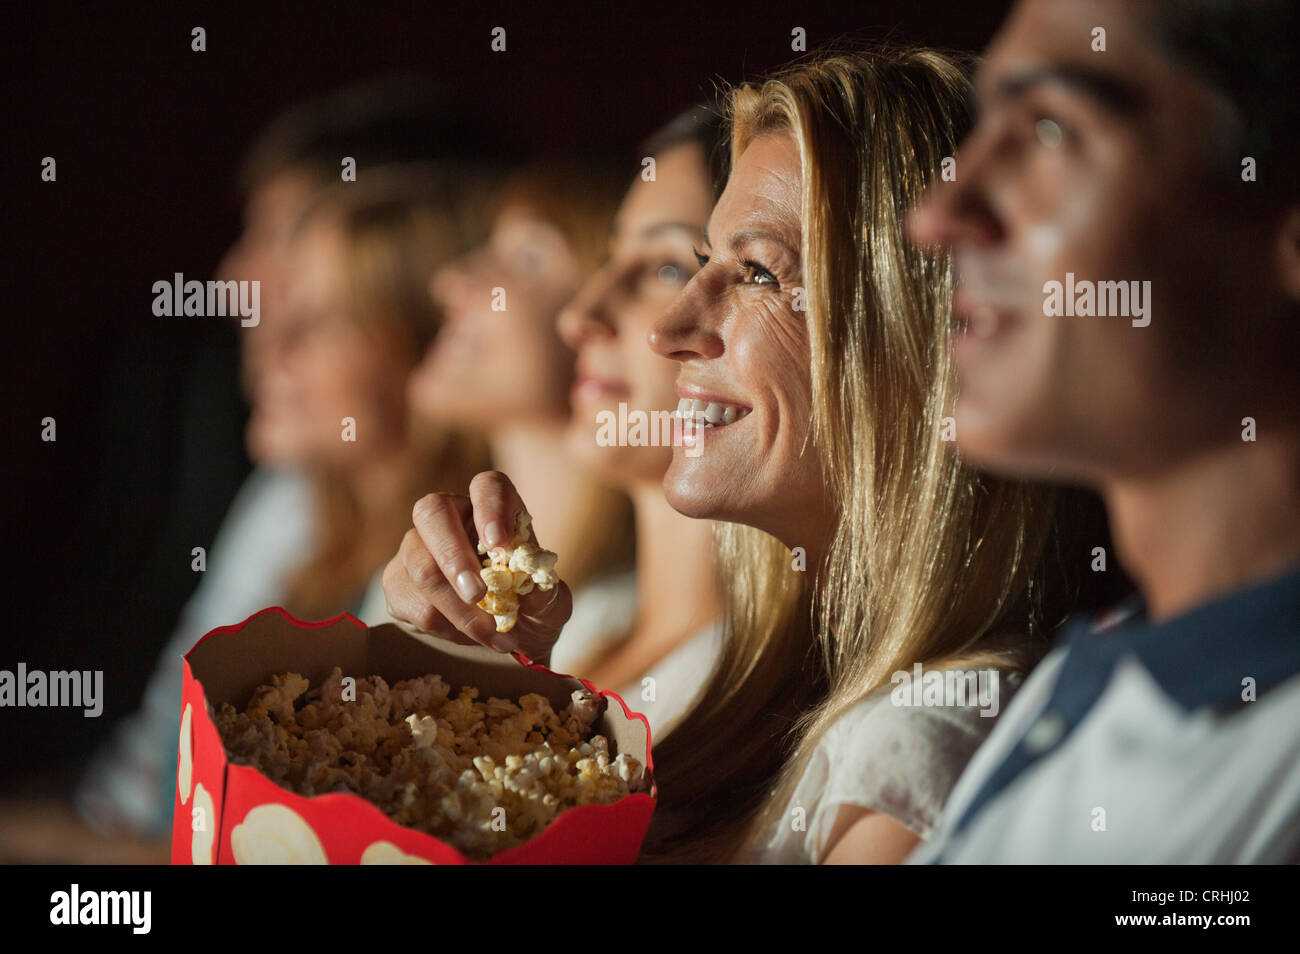 Woman eating popcorn while watching movie in theater Stock Photo